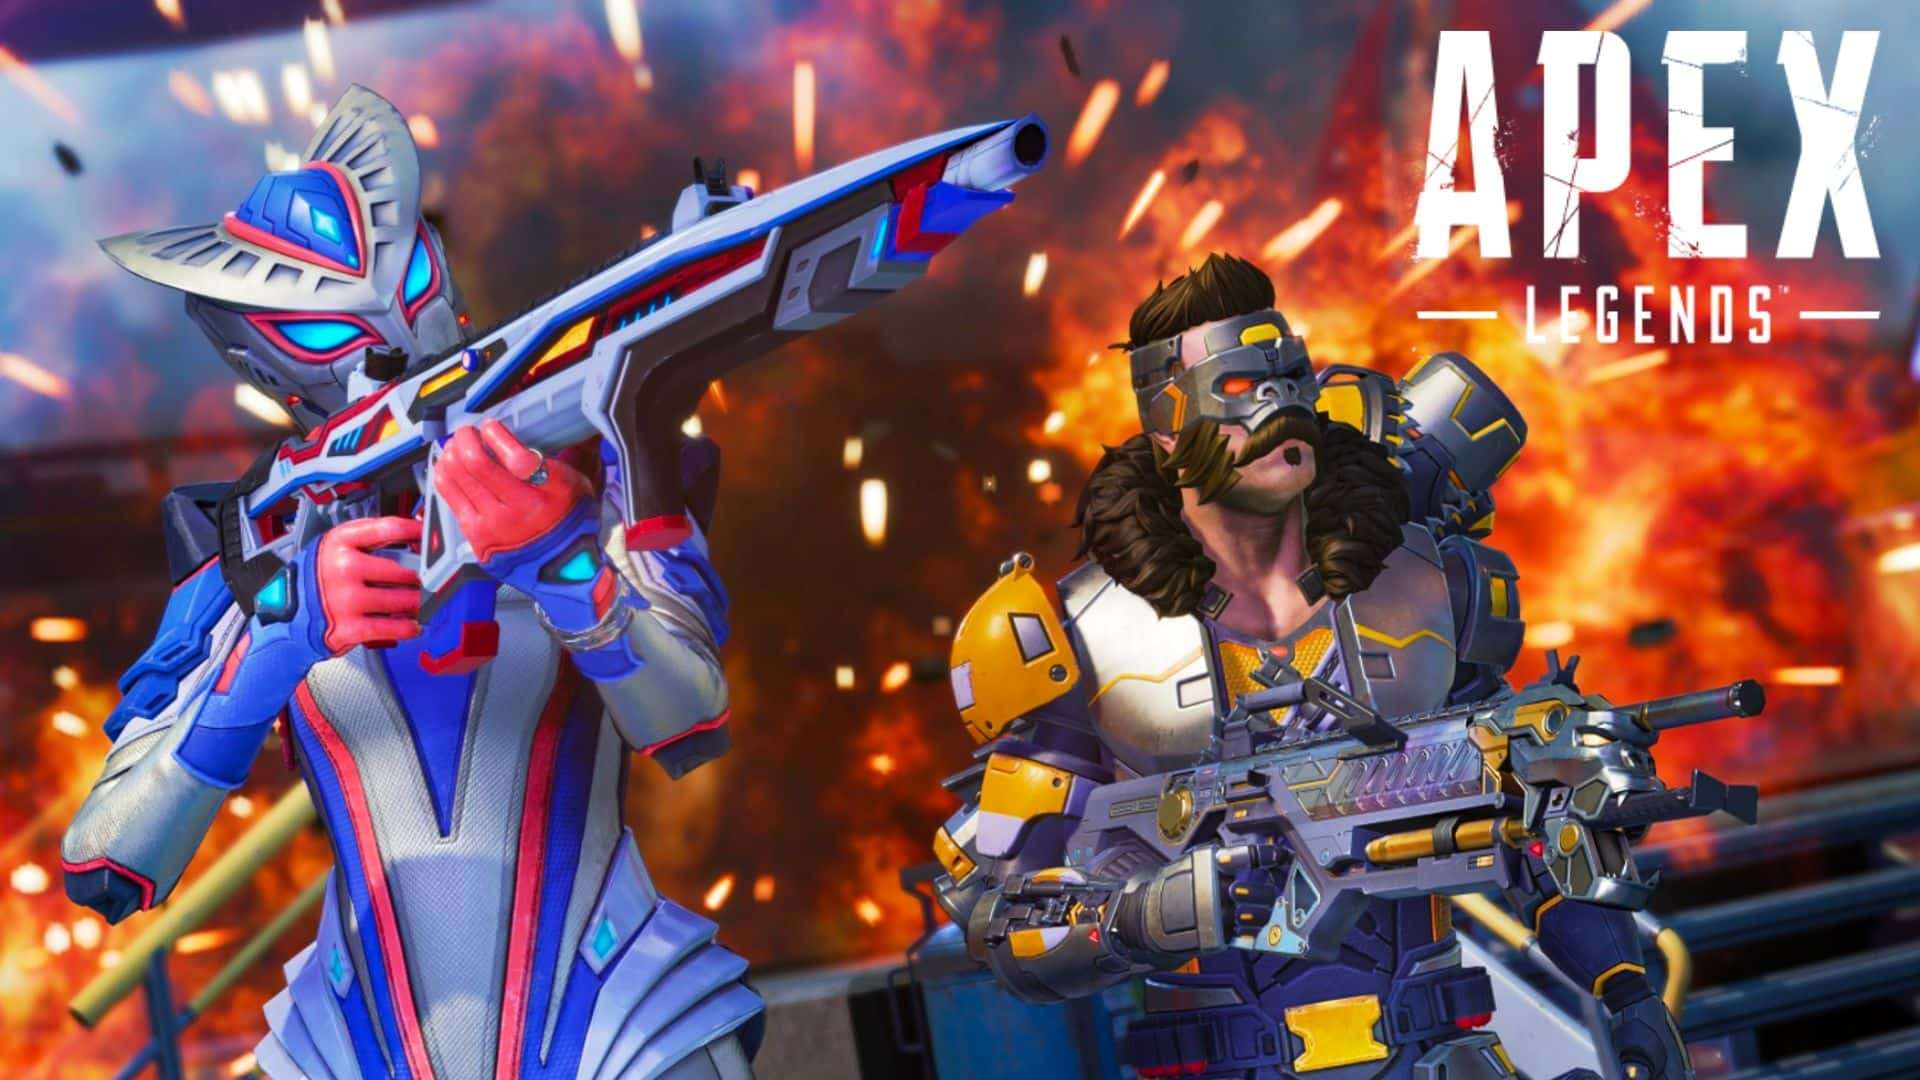 Apex Legends characters Fuse fighting in a match with fire surronding them